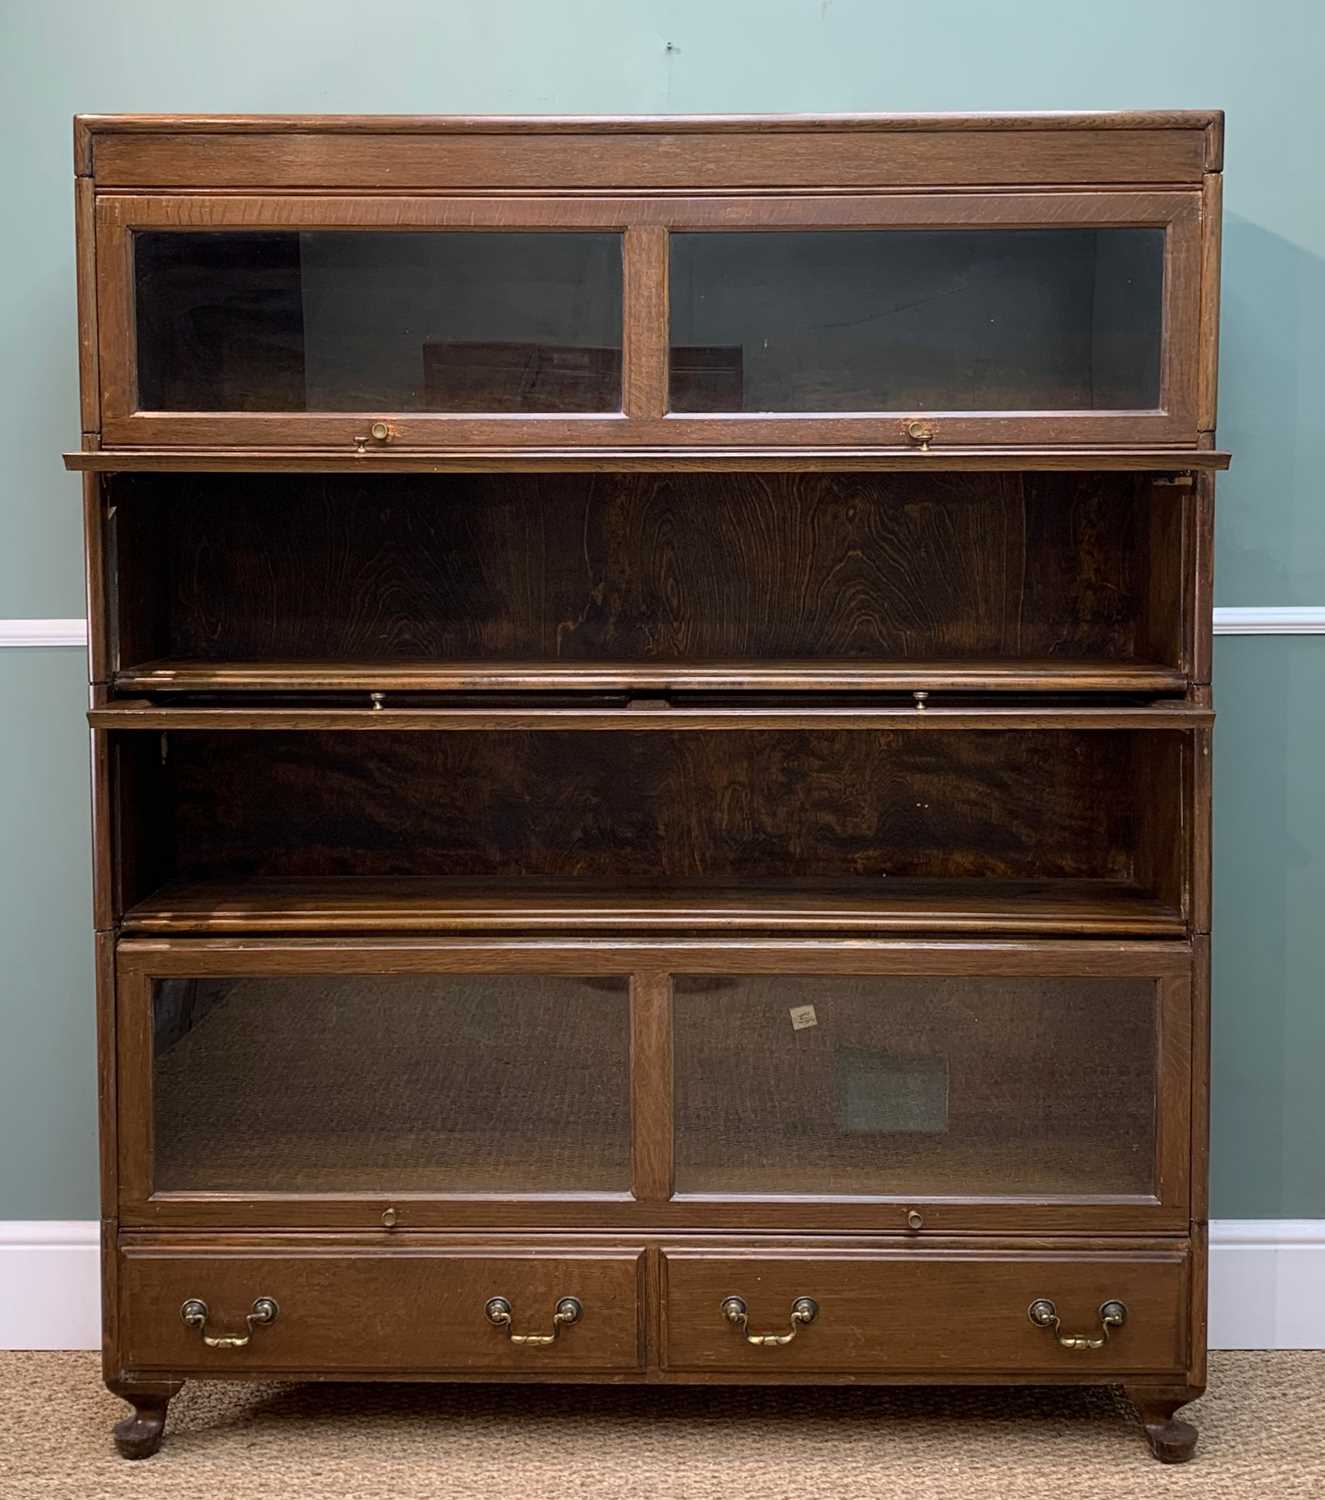 EARLY 20TH C. STAINED OAK WERNICKE STYLE BOOKCASE, four shelves with up-and-over glazed doors over